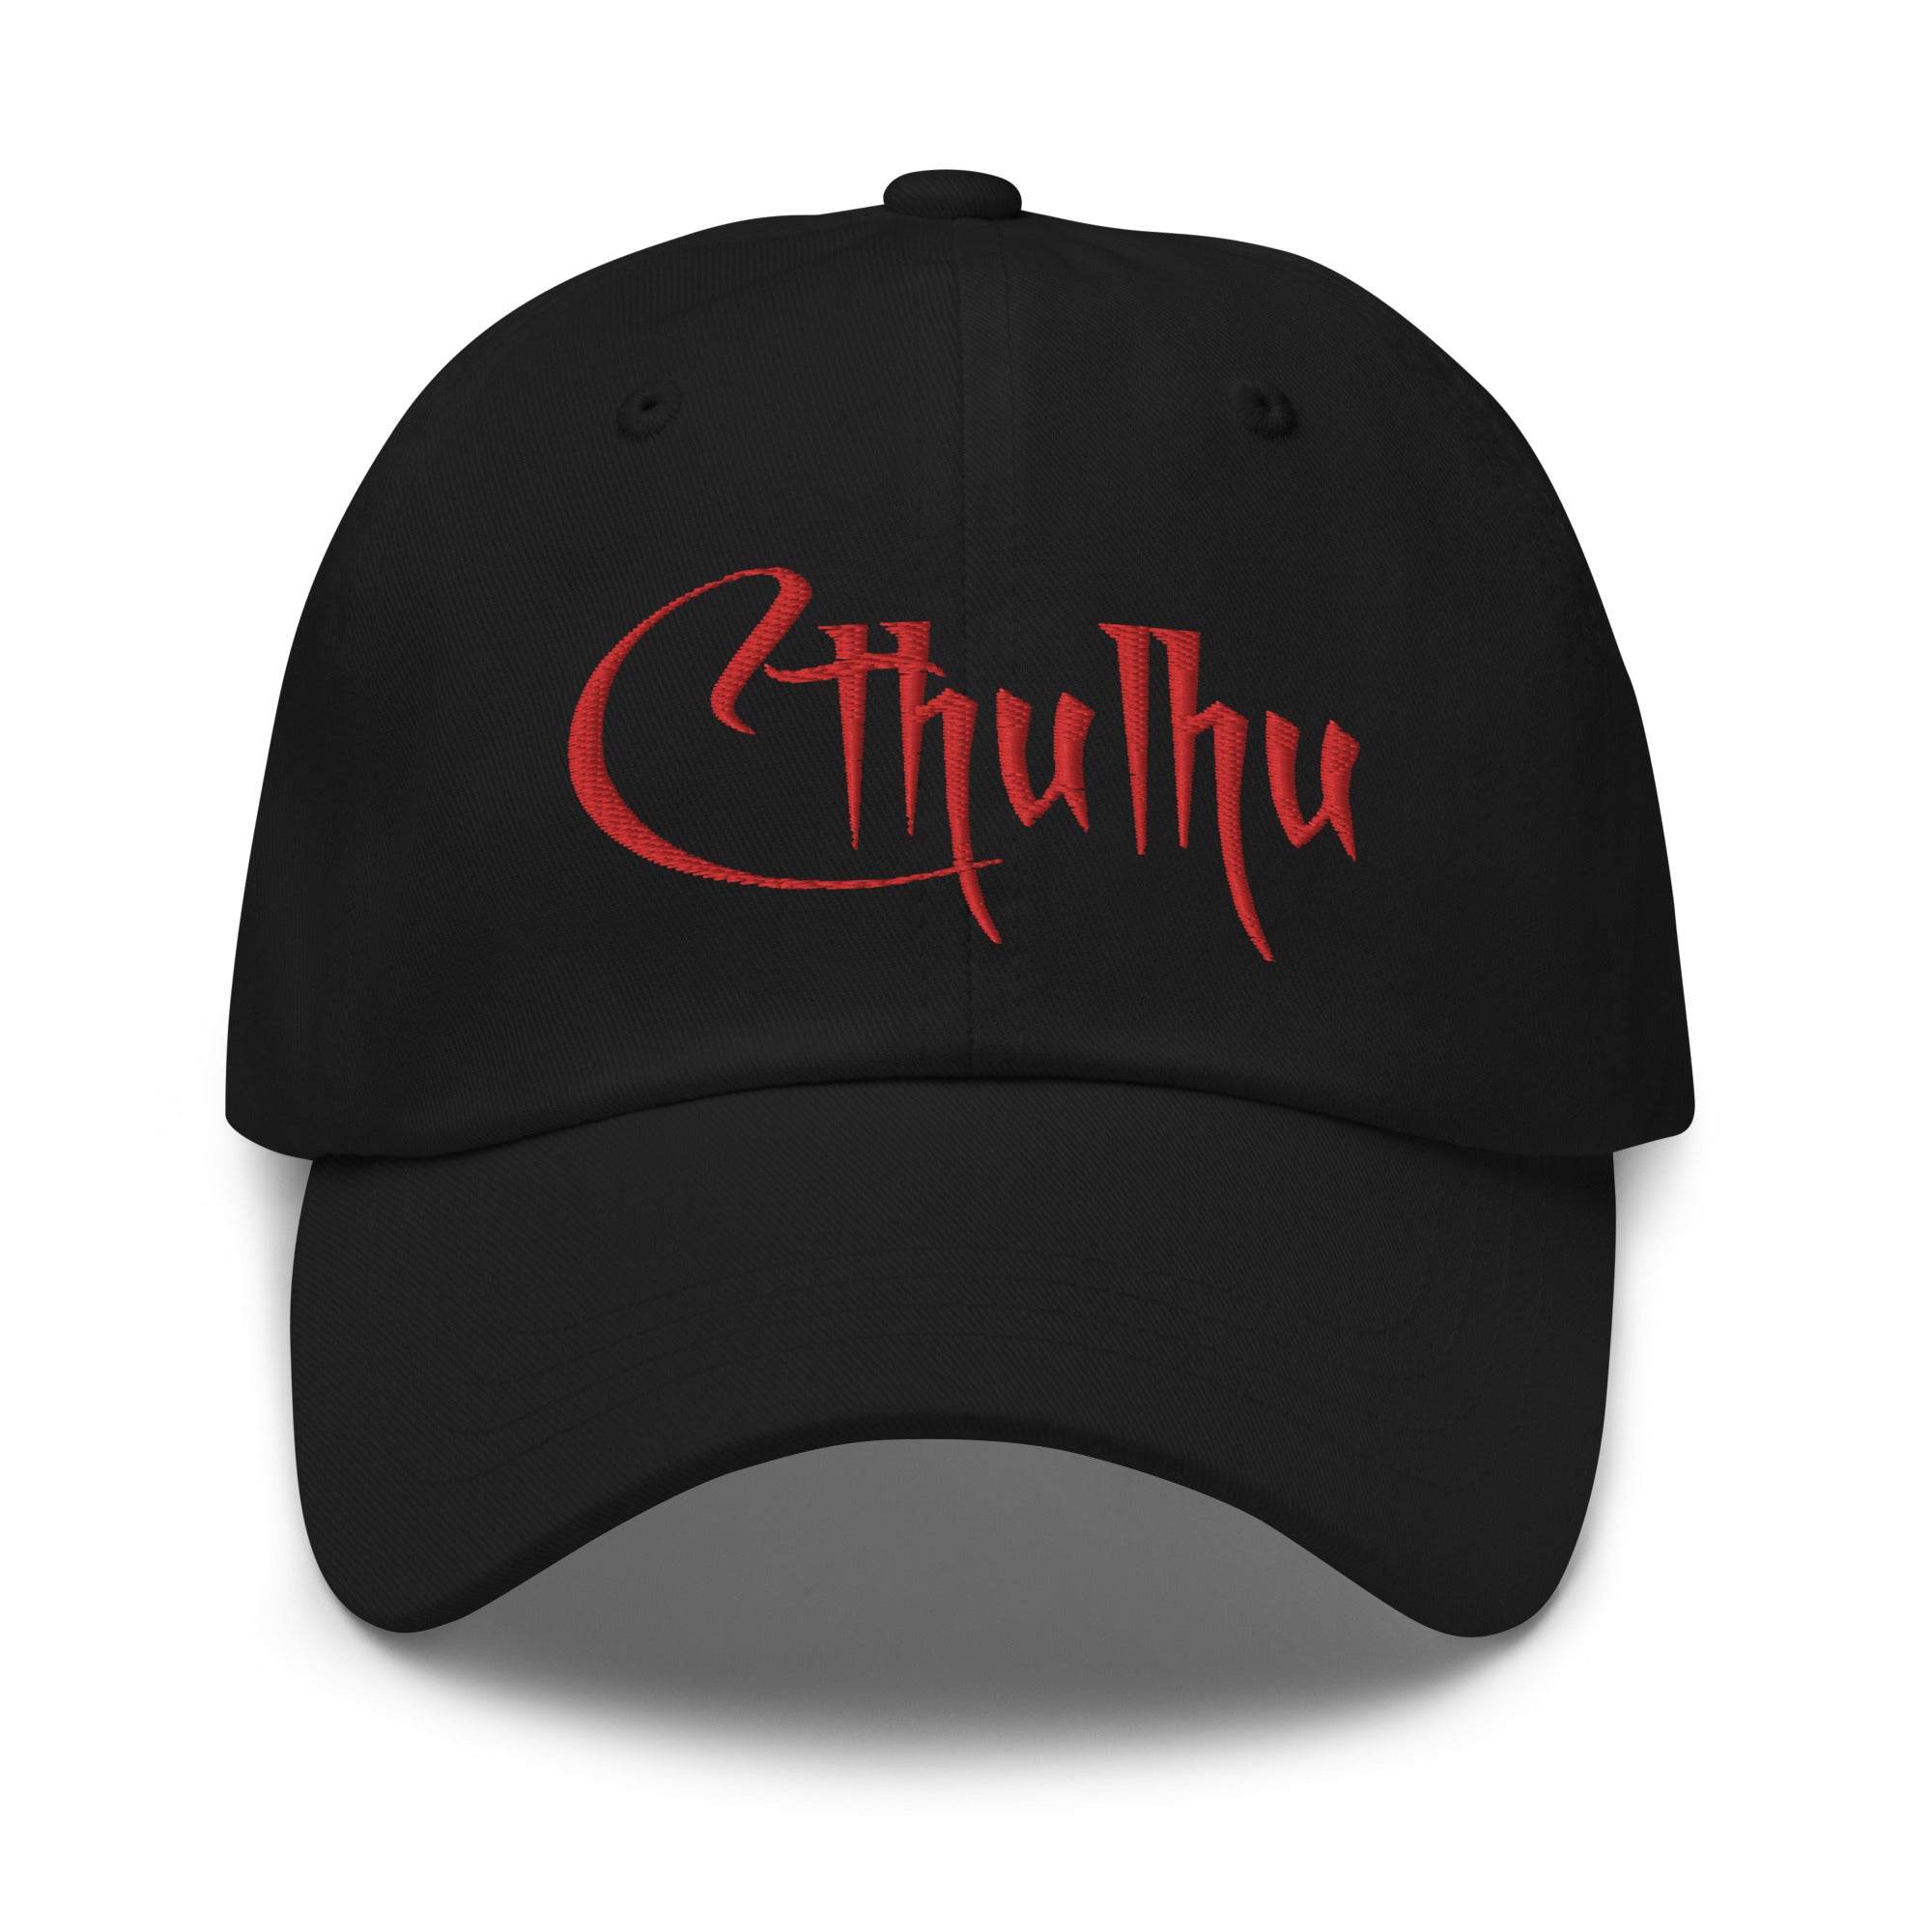 Call of Cthulhu The Great Old Ones Embroidered Baseball Cap Dad hat - Edge of Life Designs